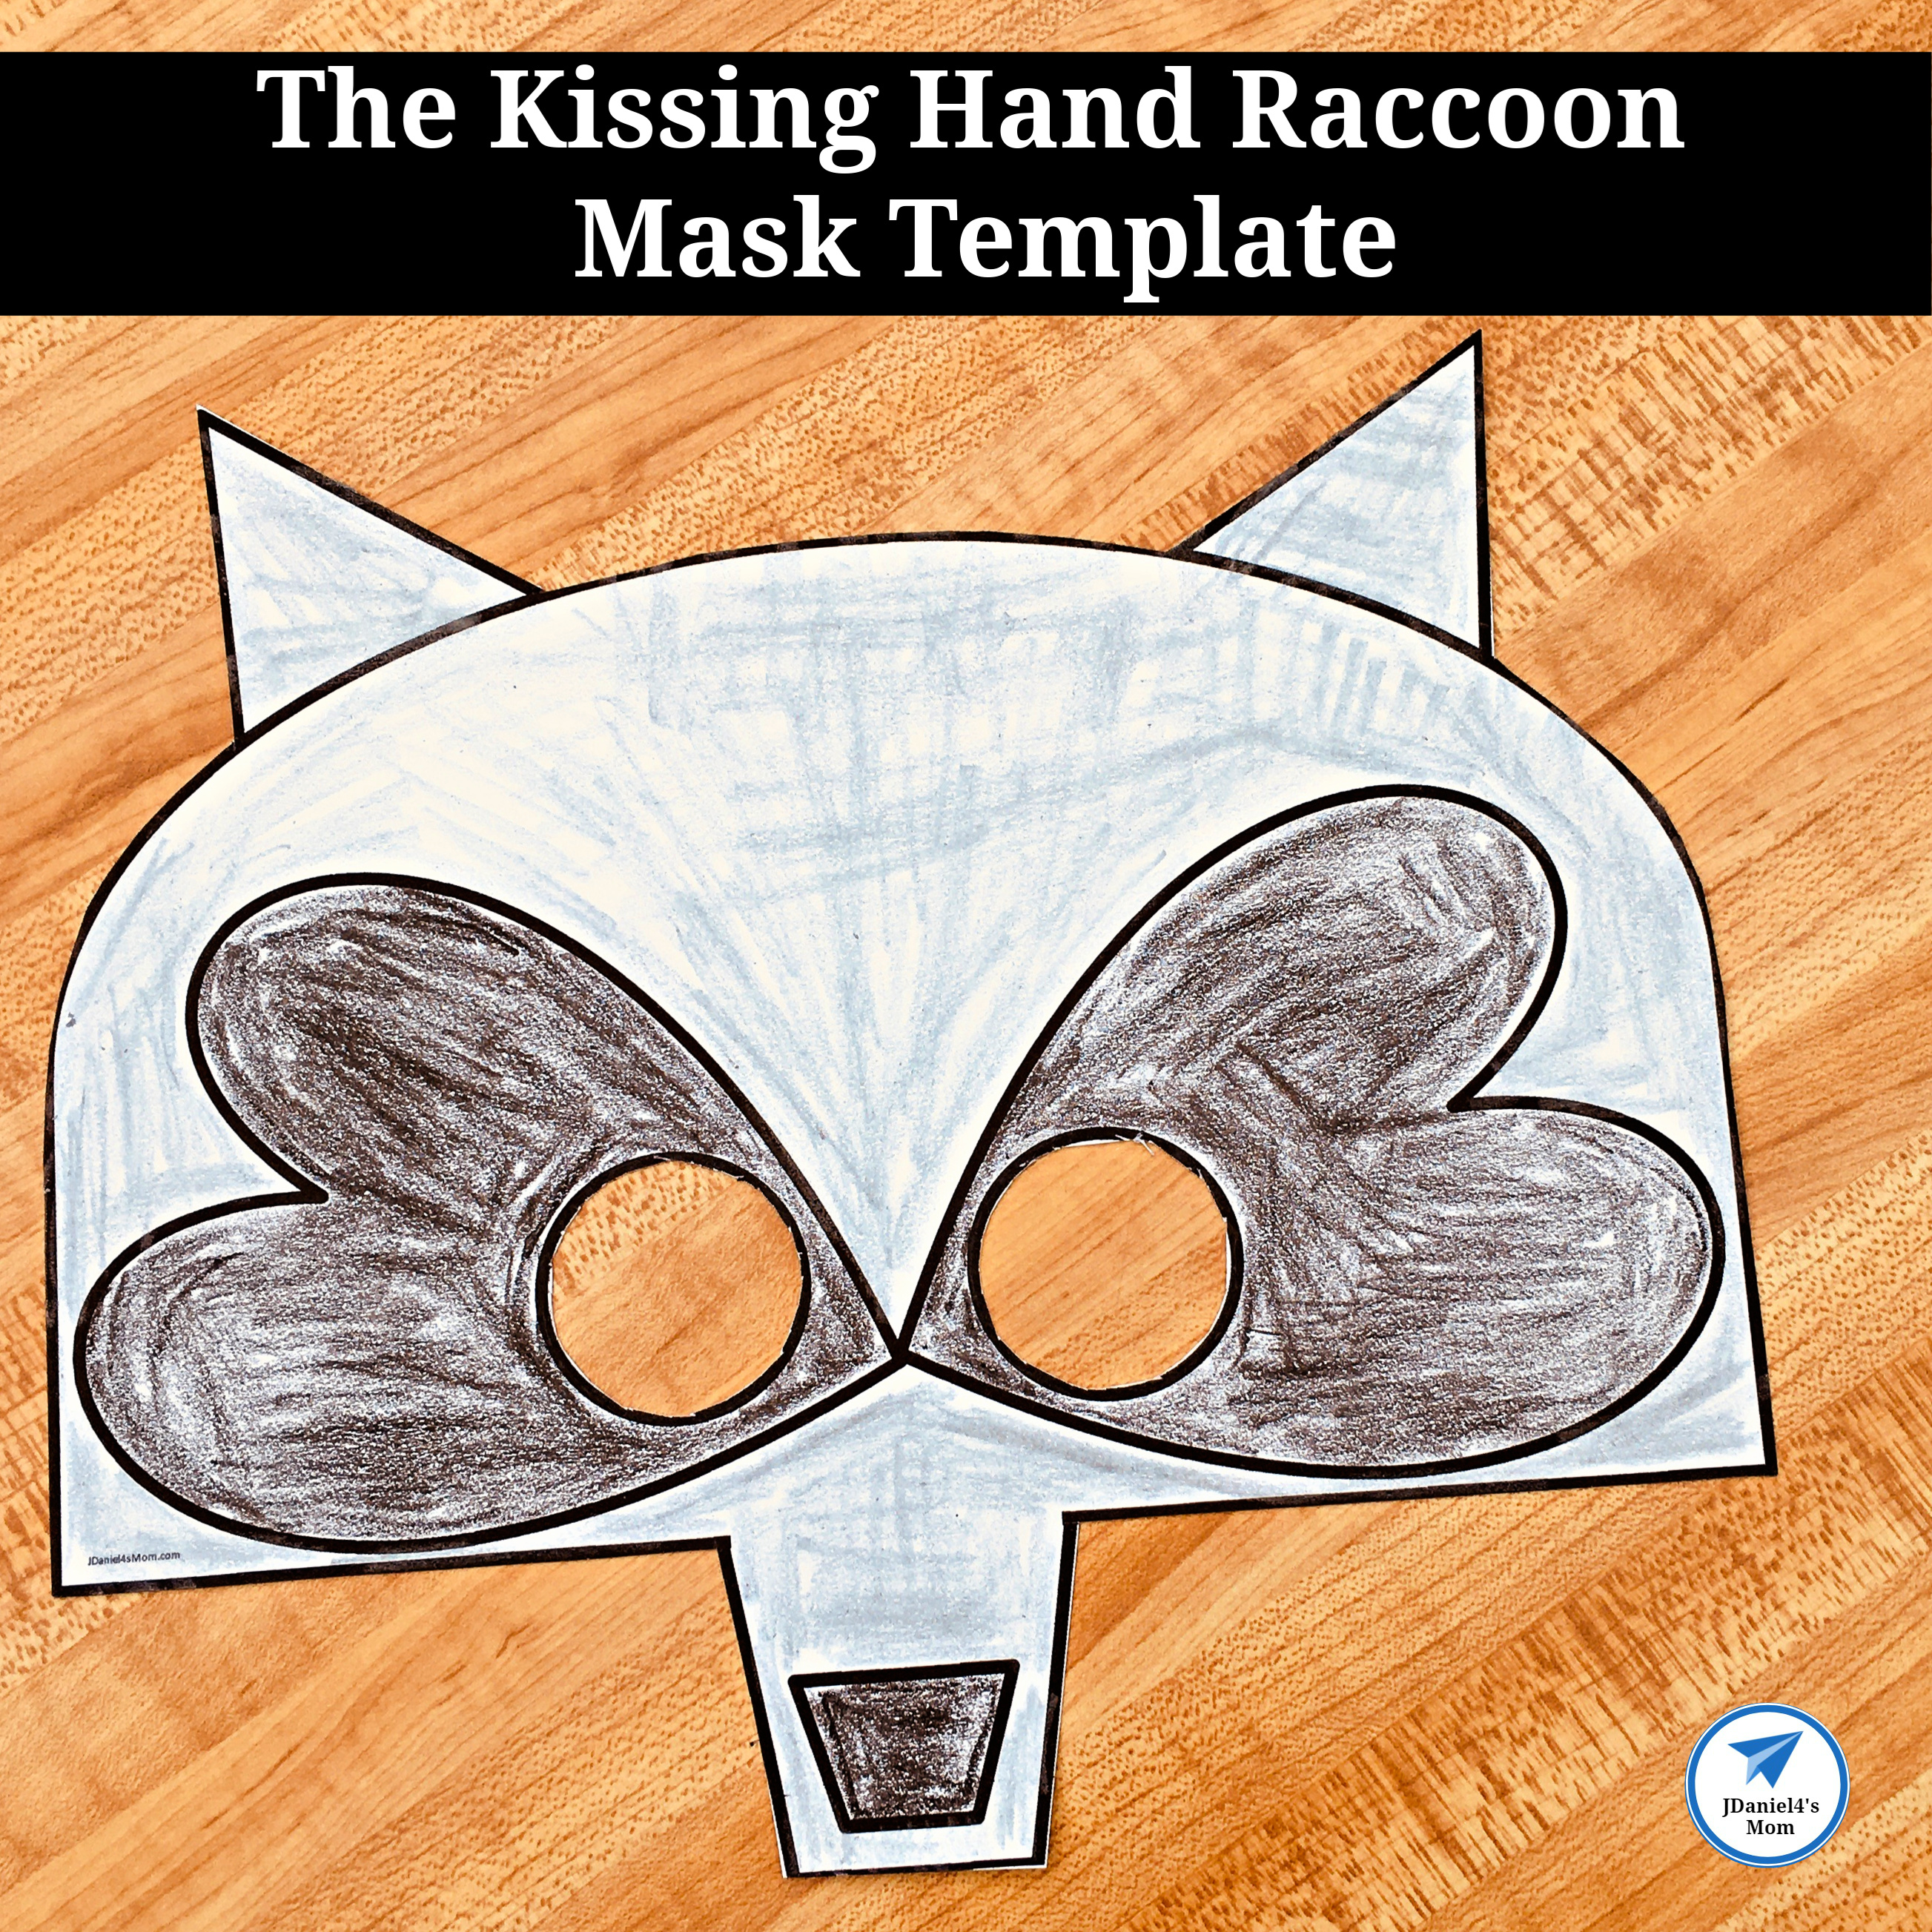 The Kissing Hand Raccoon Mask Template